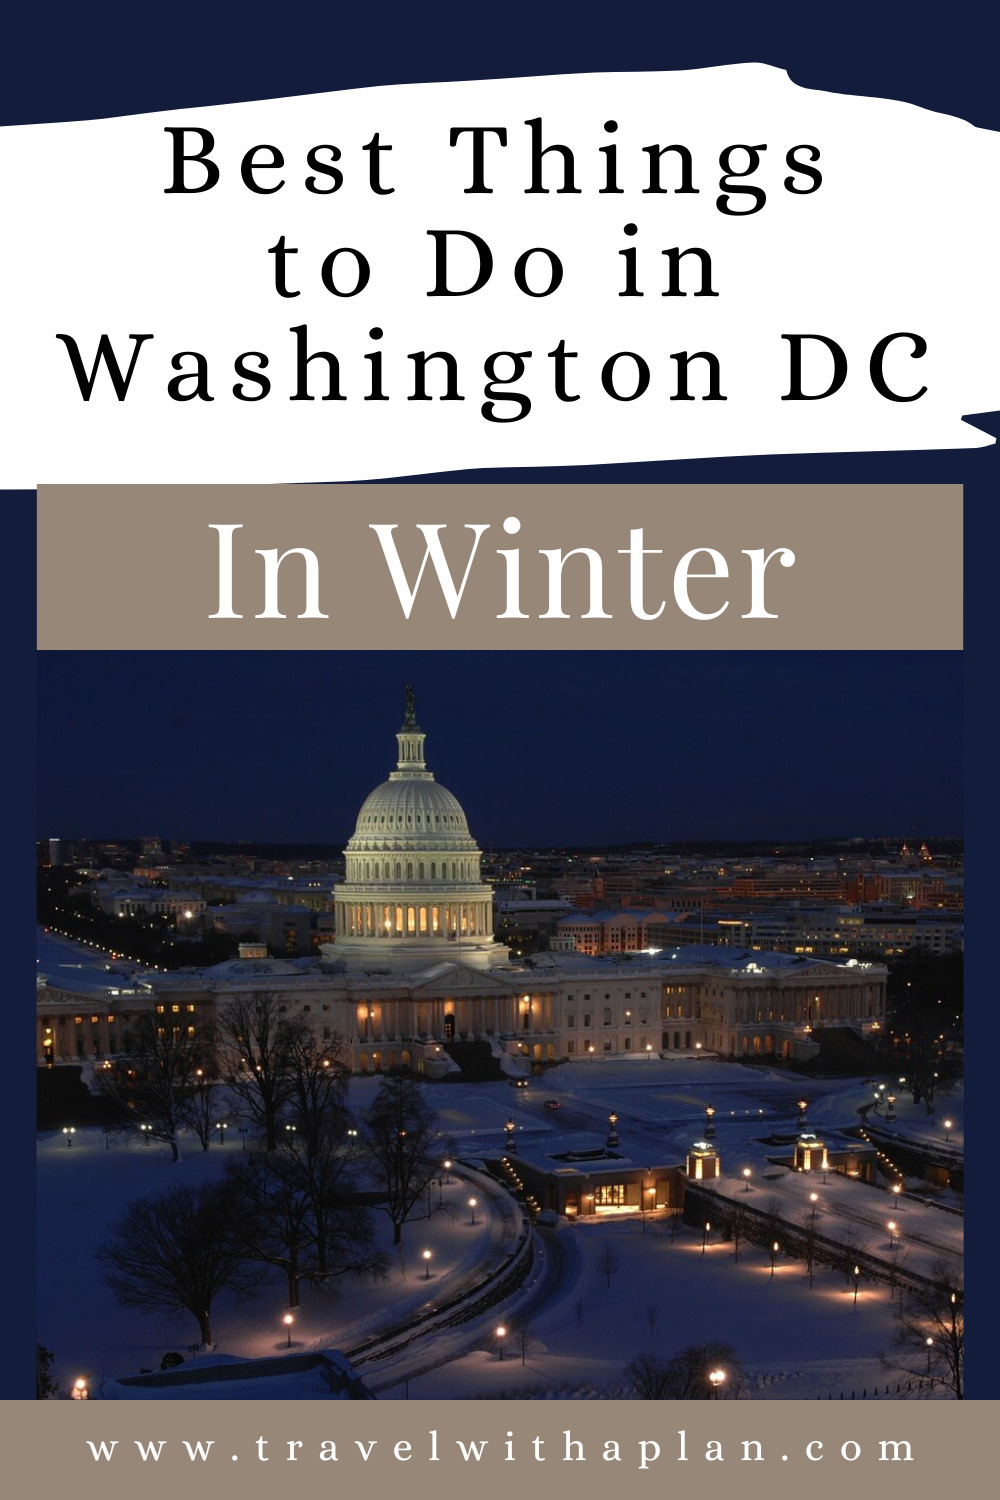 Planning a trip to Washington DC in the winter?  Get our list of the best things to do in Washington DC at Christmas and during the winther months!  #familytravel #wintergetaways